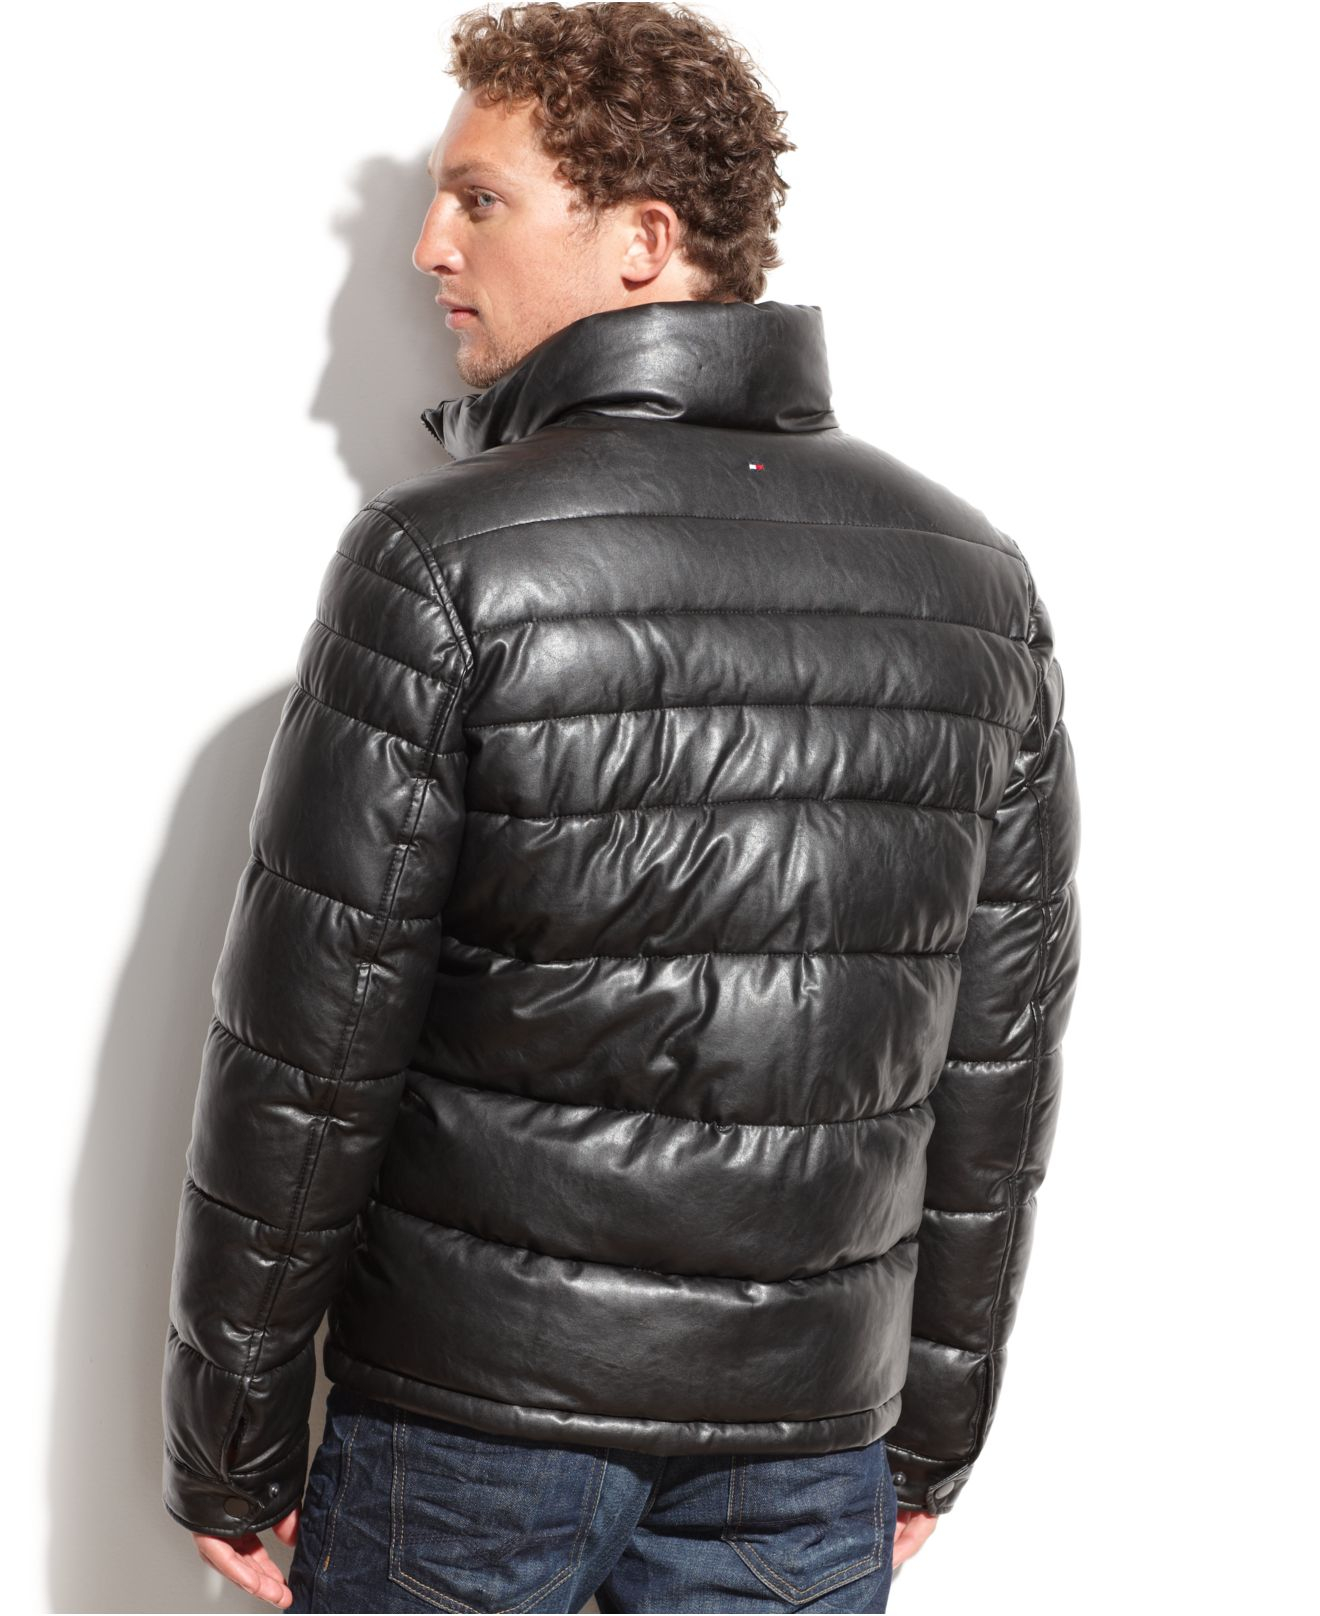 Tommy Hilfiger Faux Leather Puffer Jacket in Black for Men - Lyst